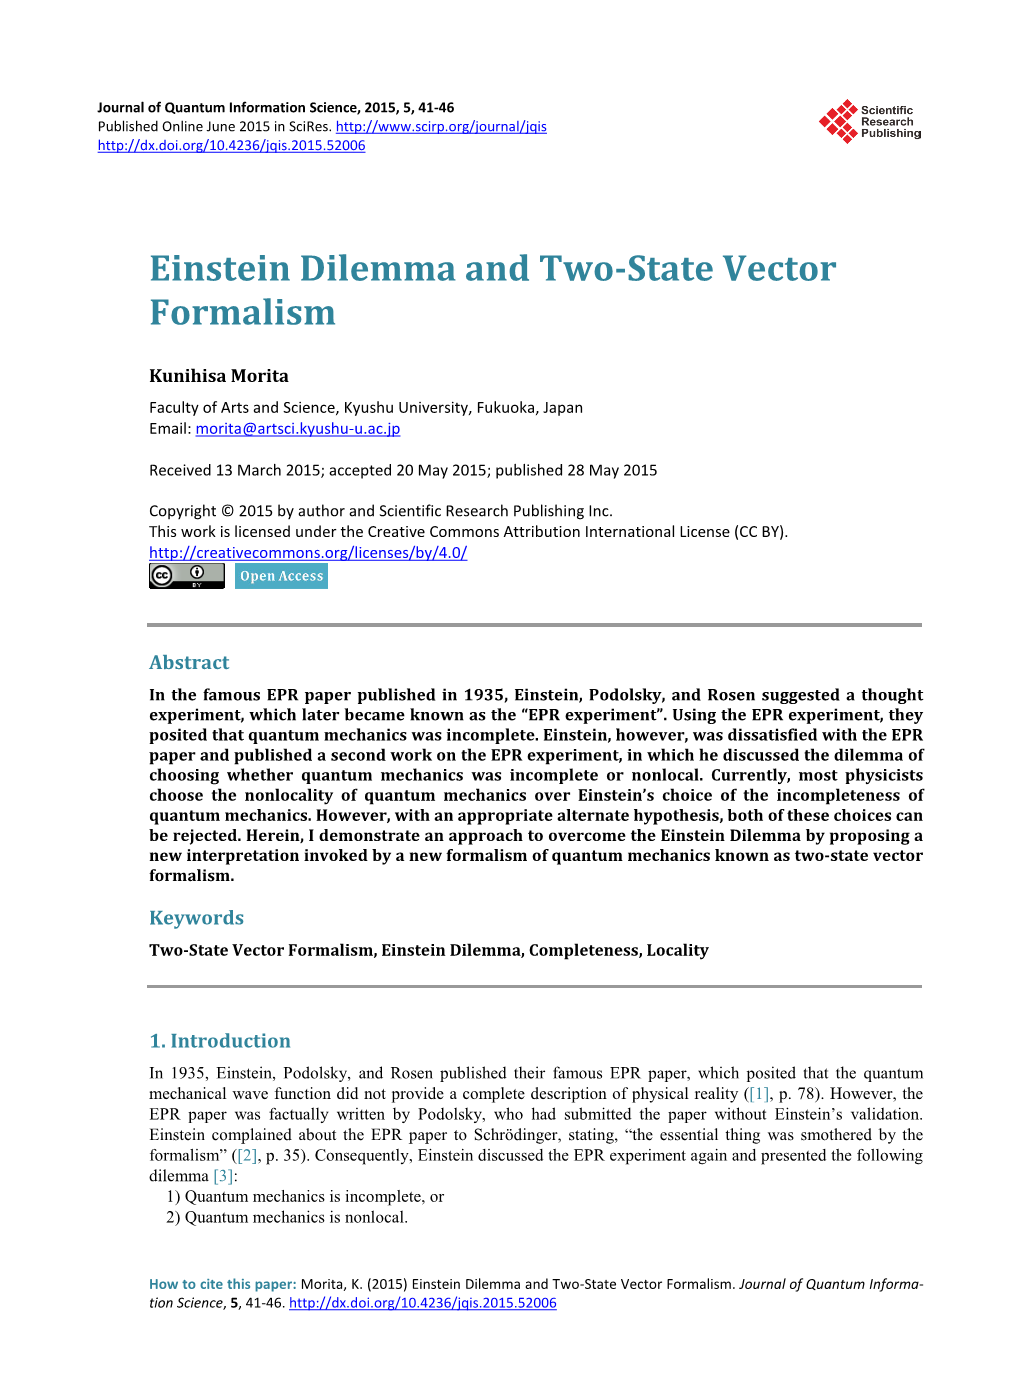 Einstein Dilemma and Two-State Vector Formalism